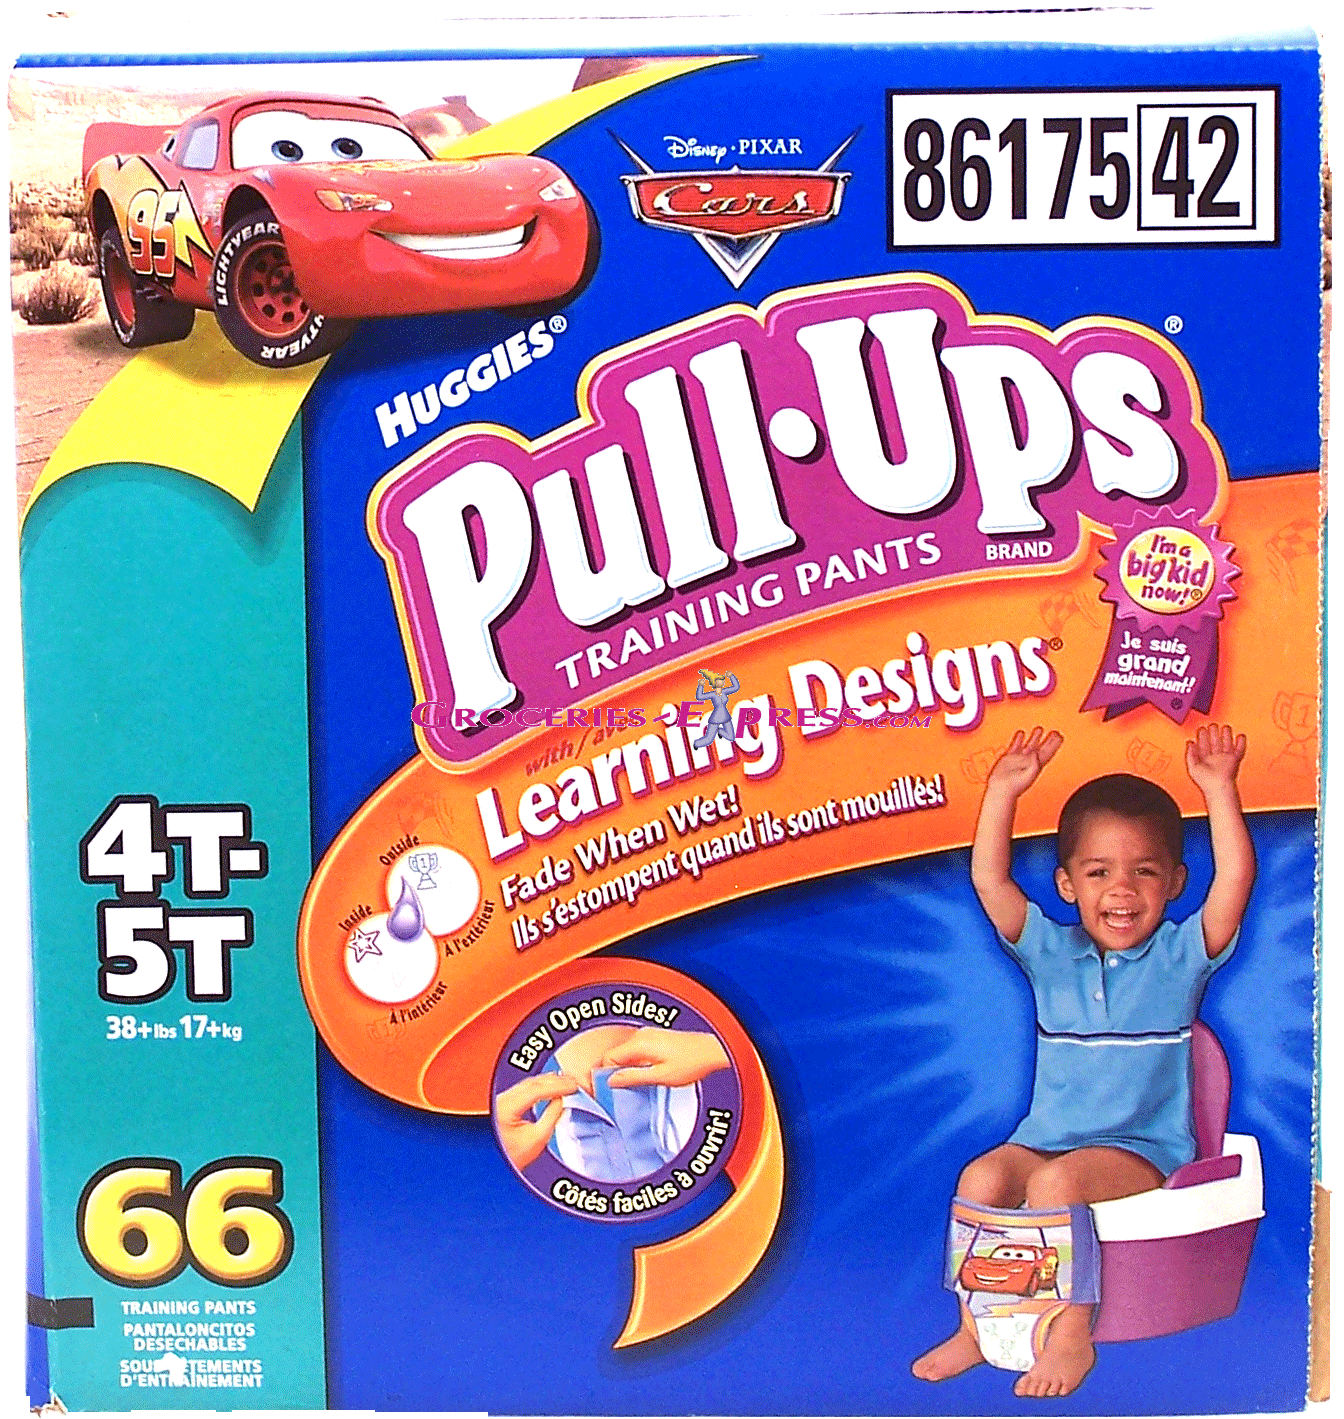 Huggies Pull-ups 4T-5T training pants with learning designs, 38+ lbs. Full-Size Picture